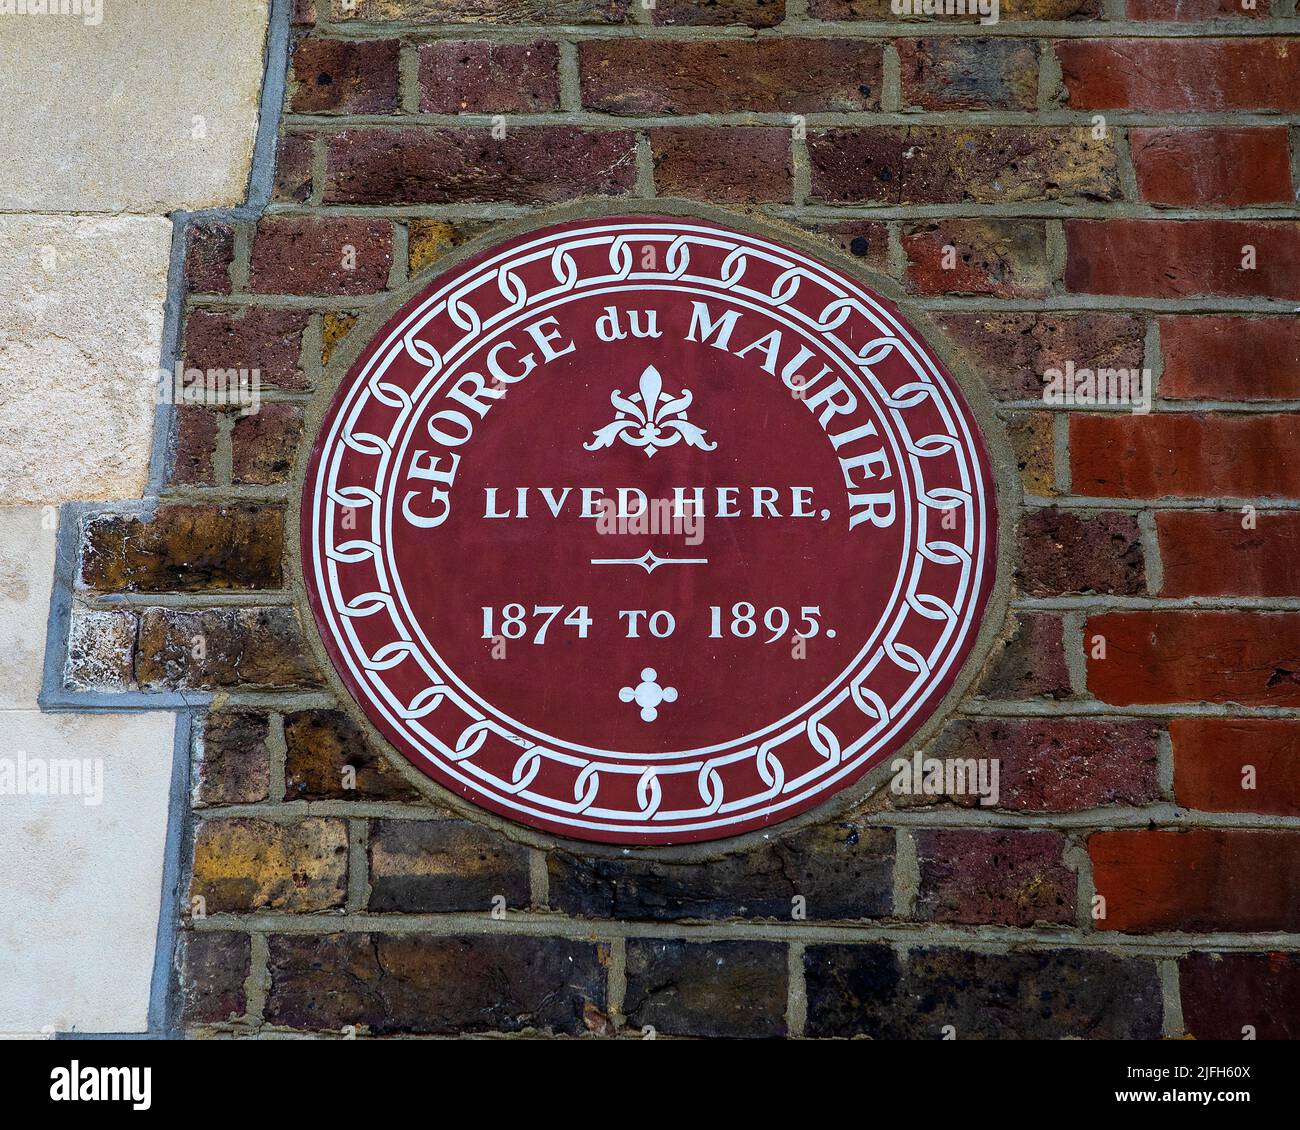 London, UK - May 19th 2022: A plaque in the Hampstead area of London, UK, marking where famous cartoonist and writer George du Maurier once lived. Stock Photo